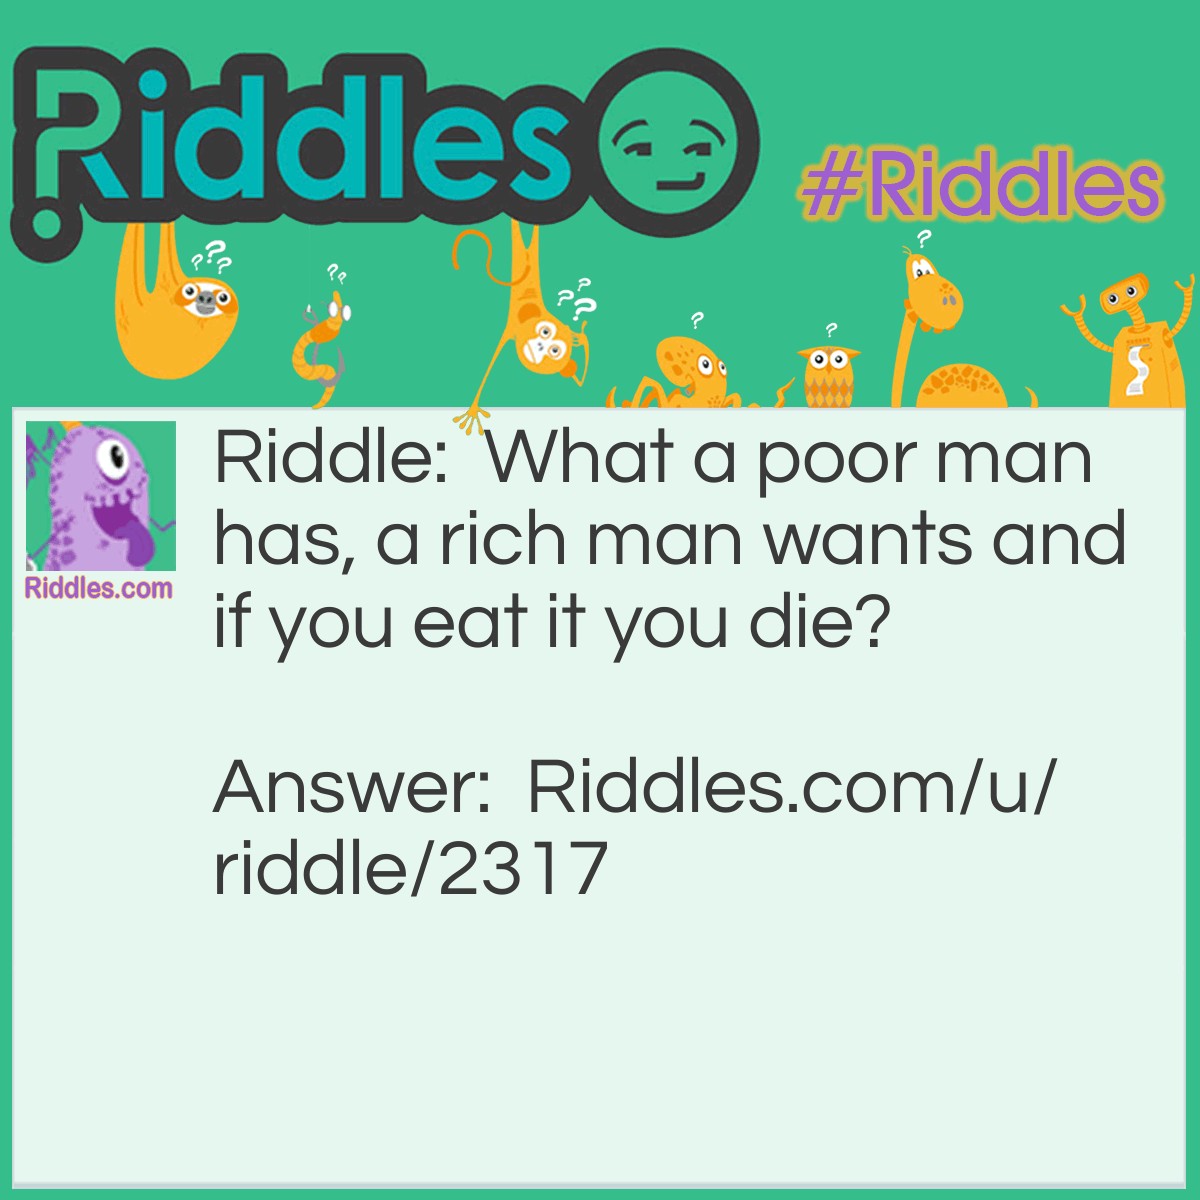 Riddle: What a poor man has, a rich man wants and if you eat it you die? Answer: Nothing.